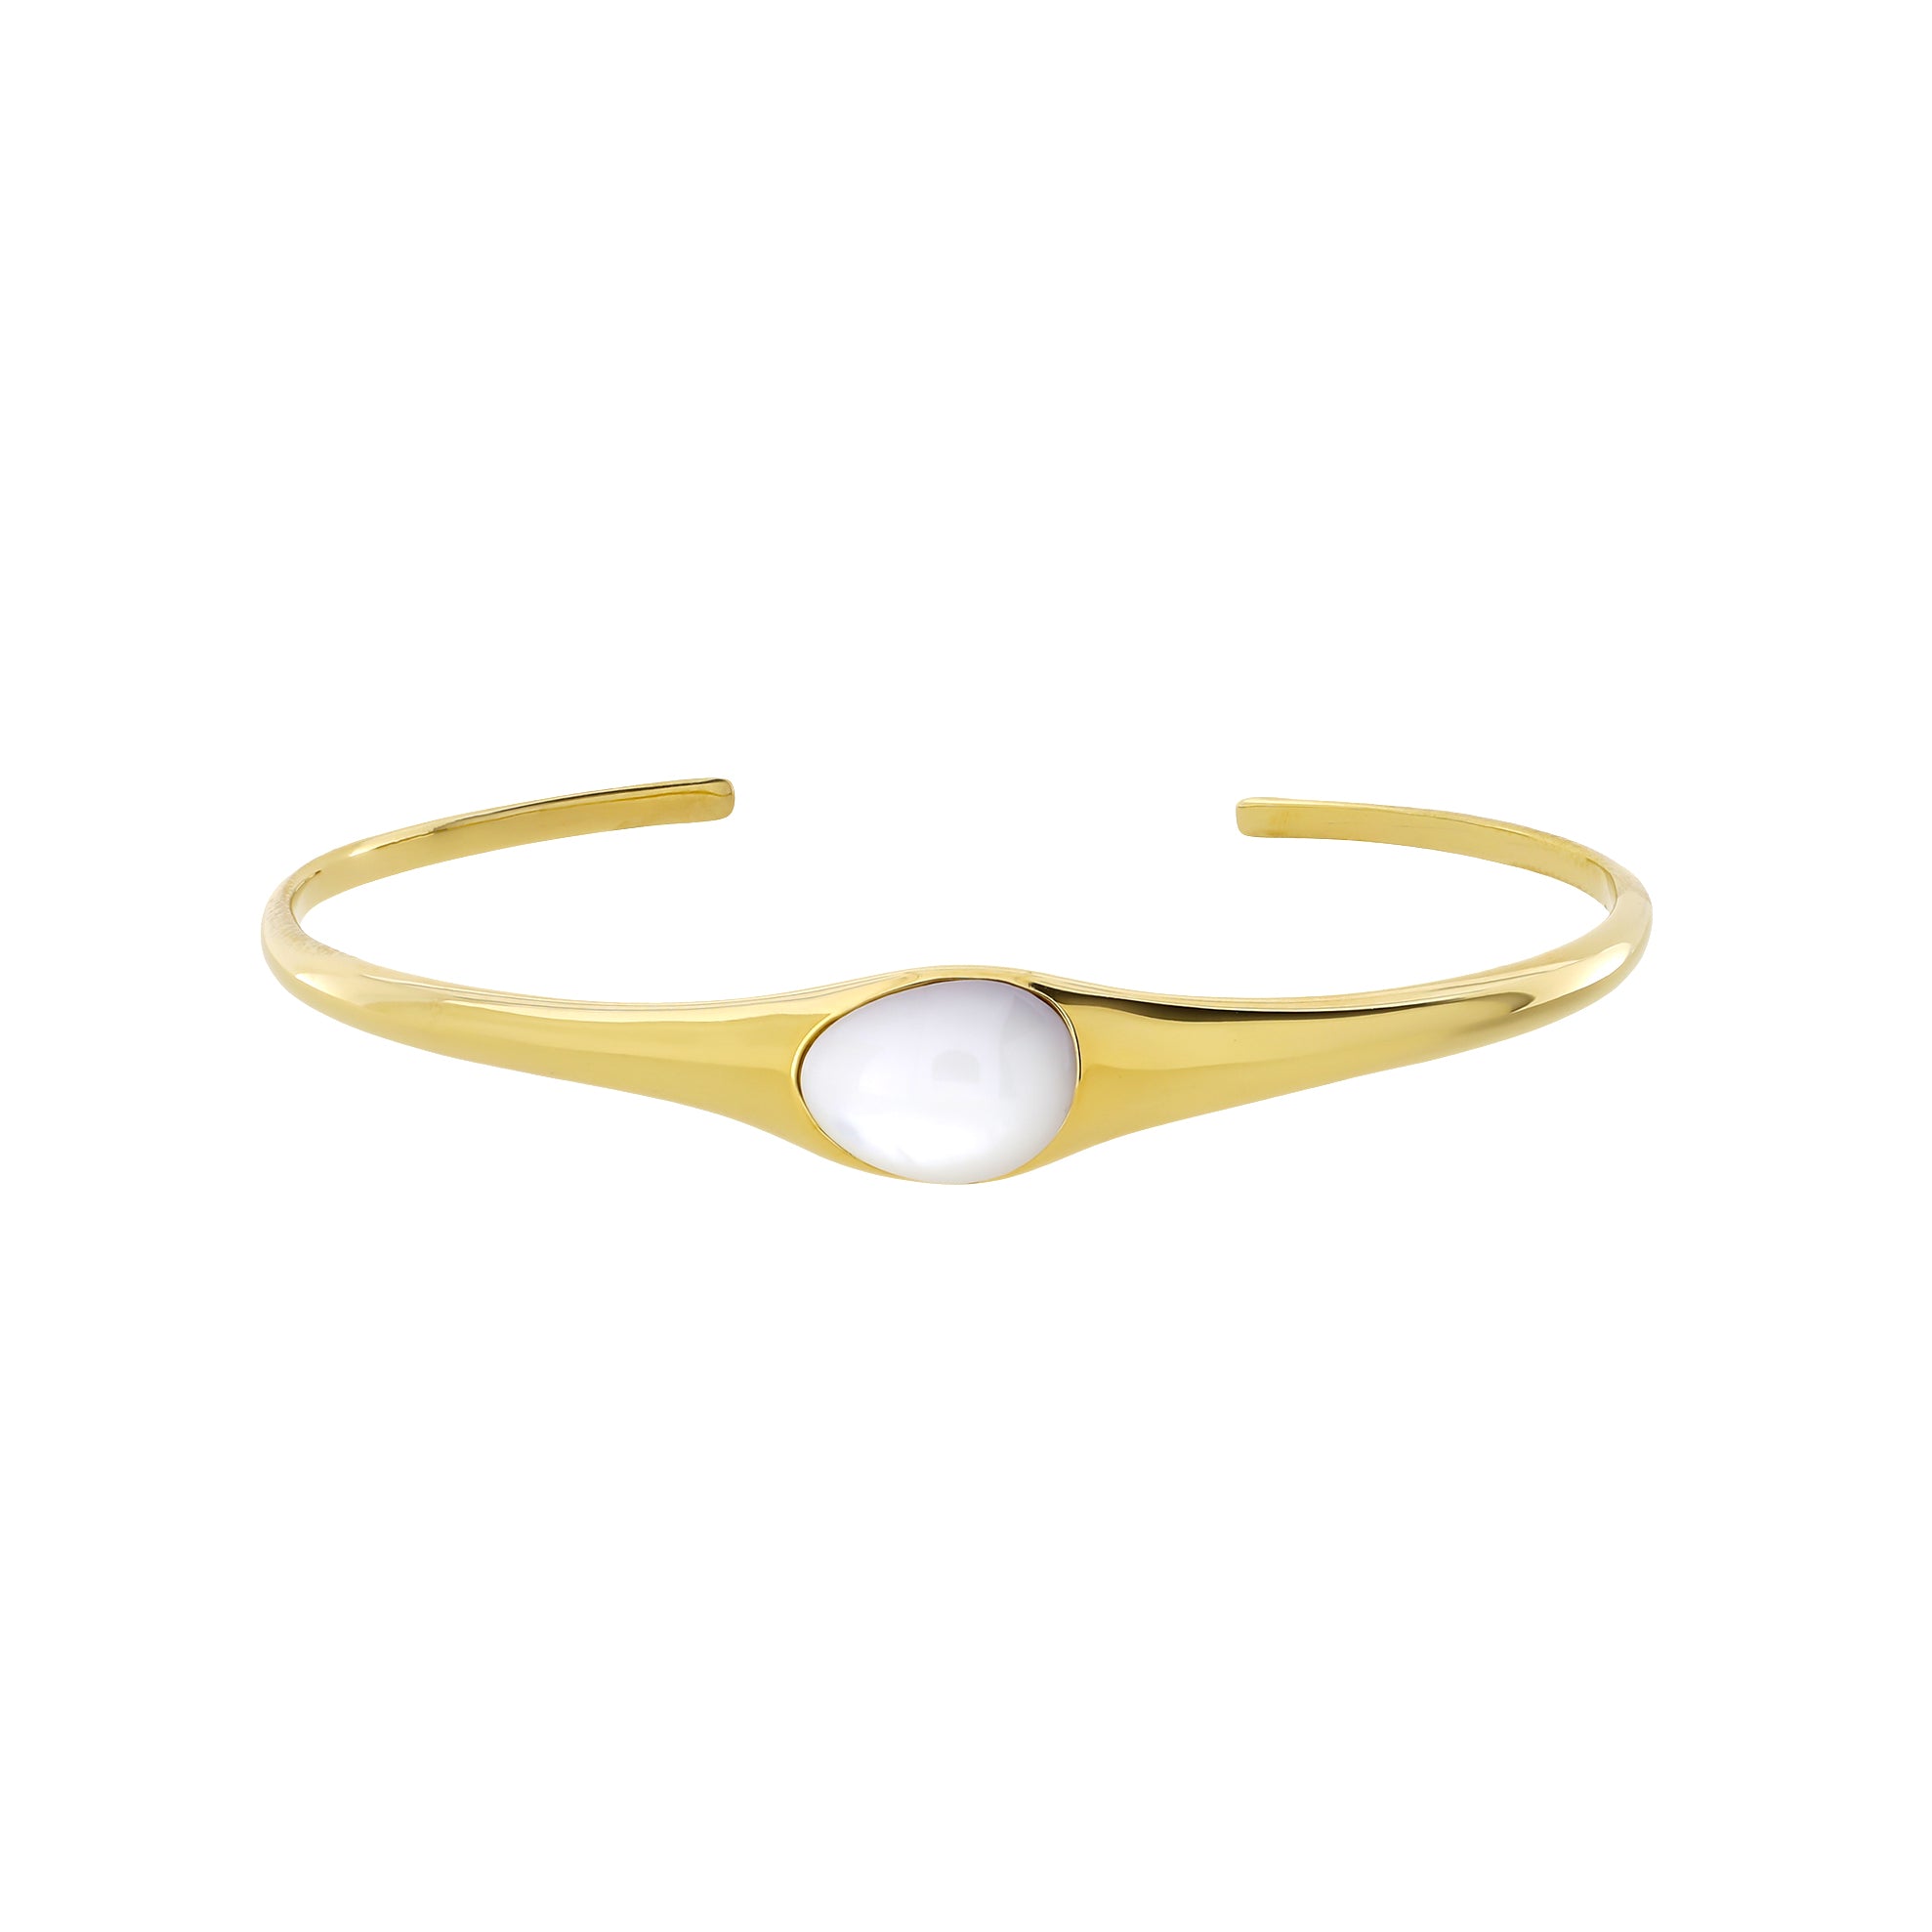 Gold Vermeil & Mother of Pearl Cuff Bangle